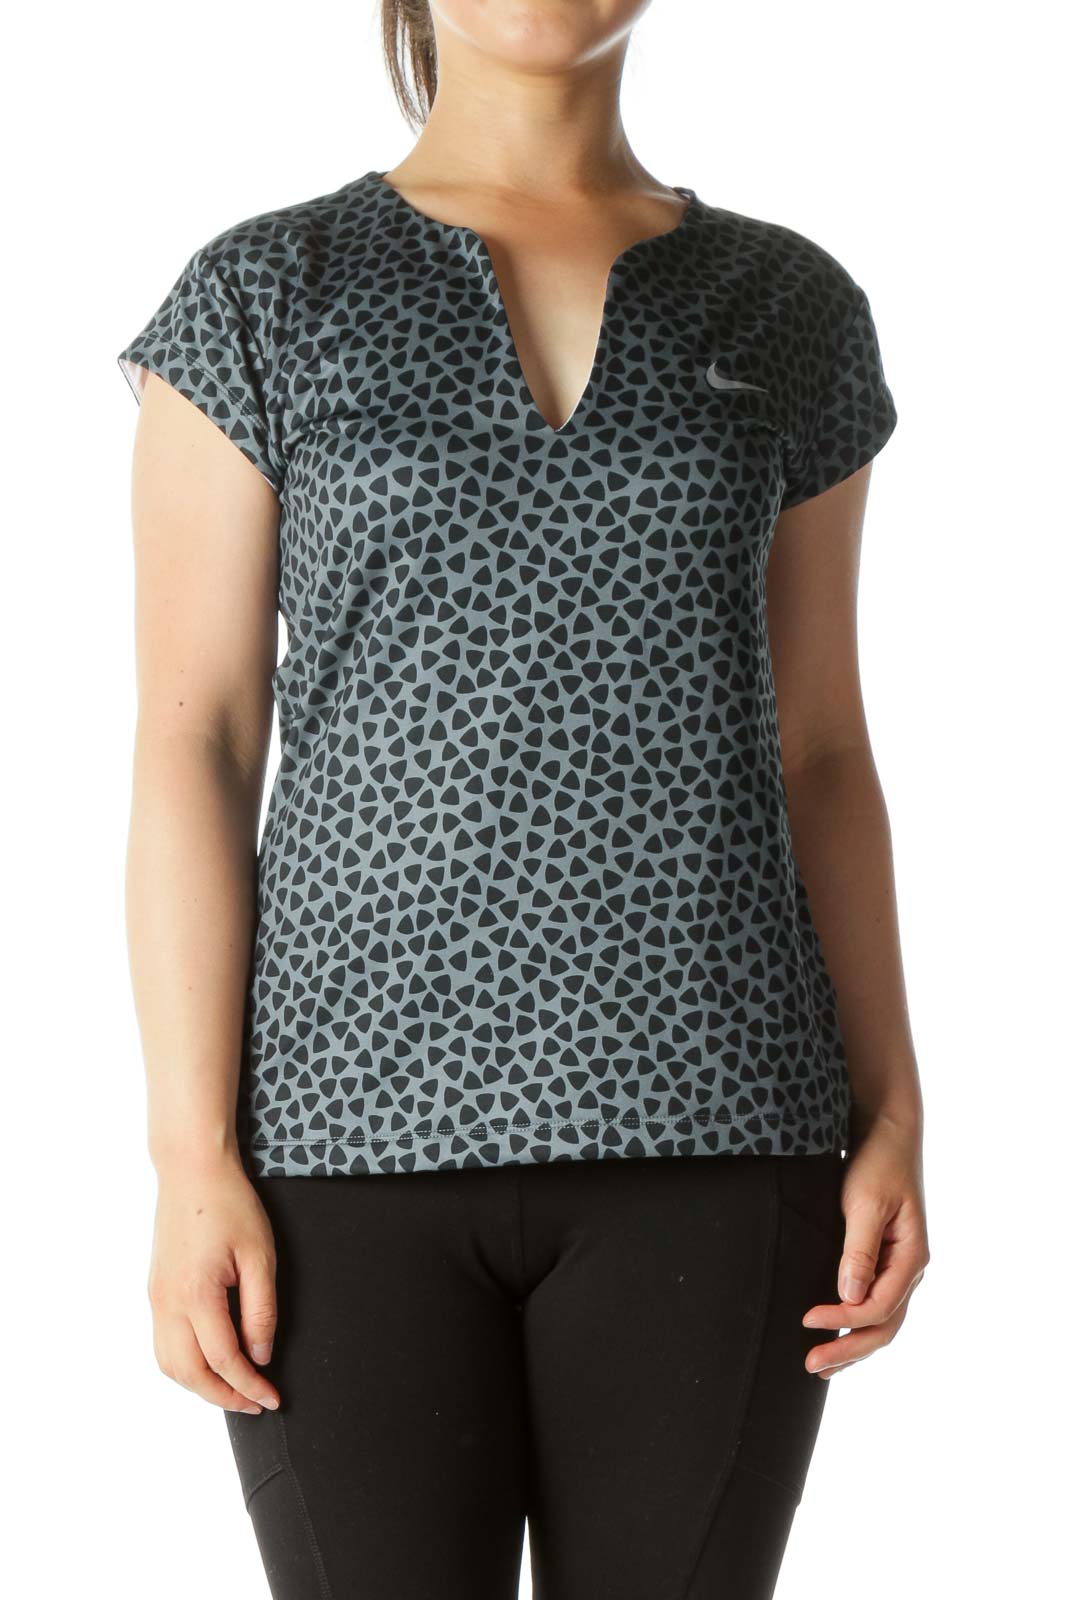 Gray and Black Triangle Print Sports Top Front